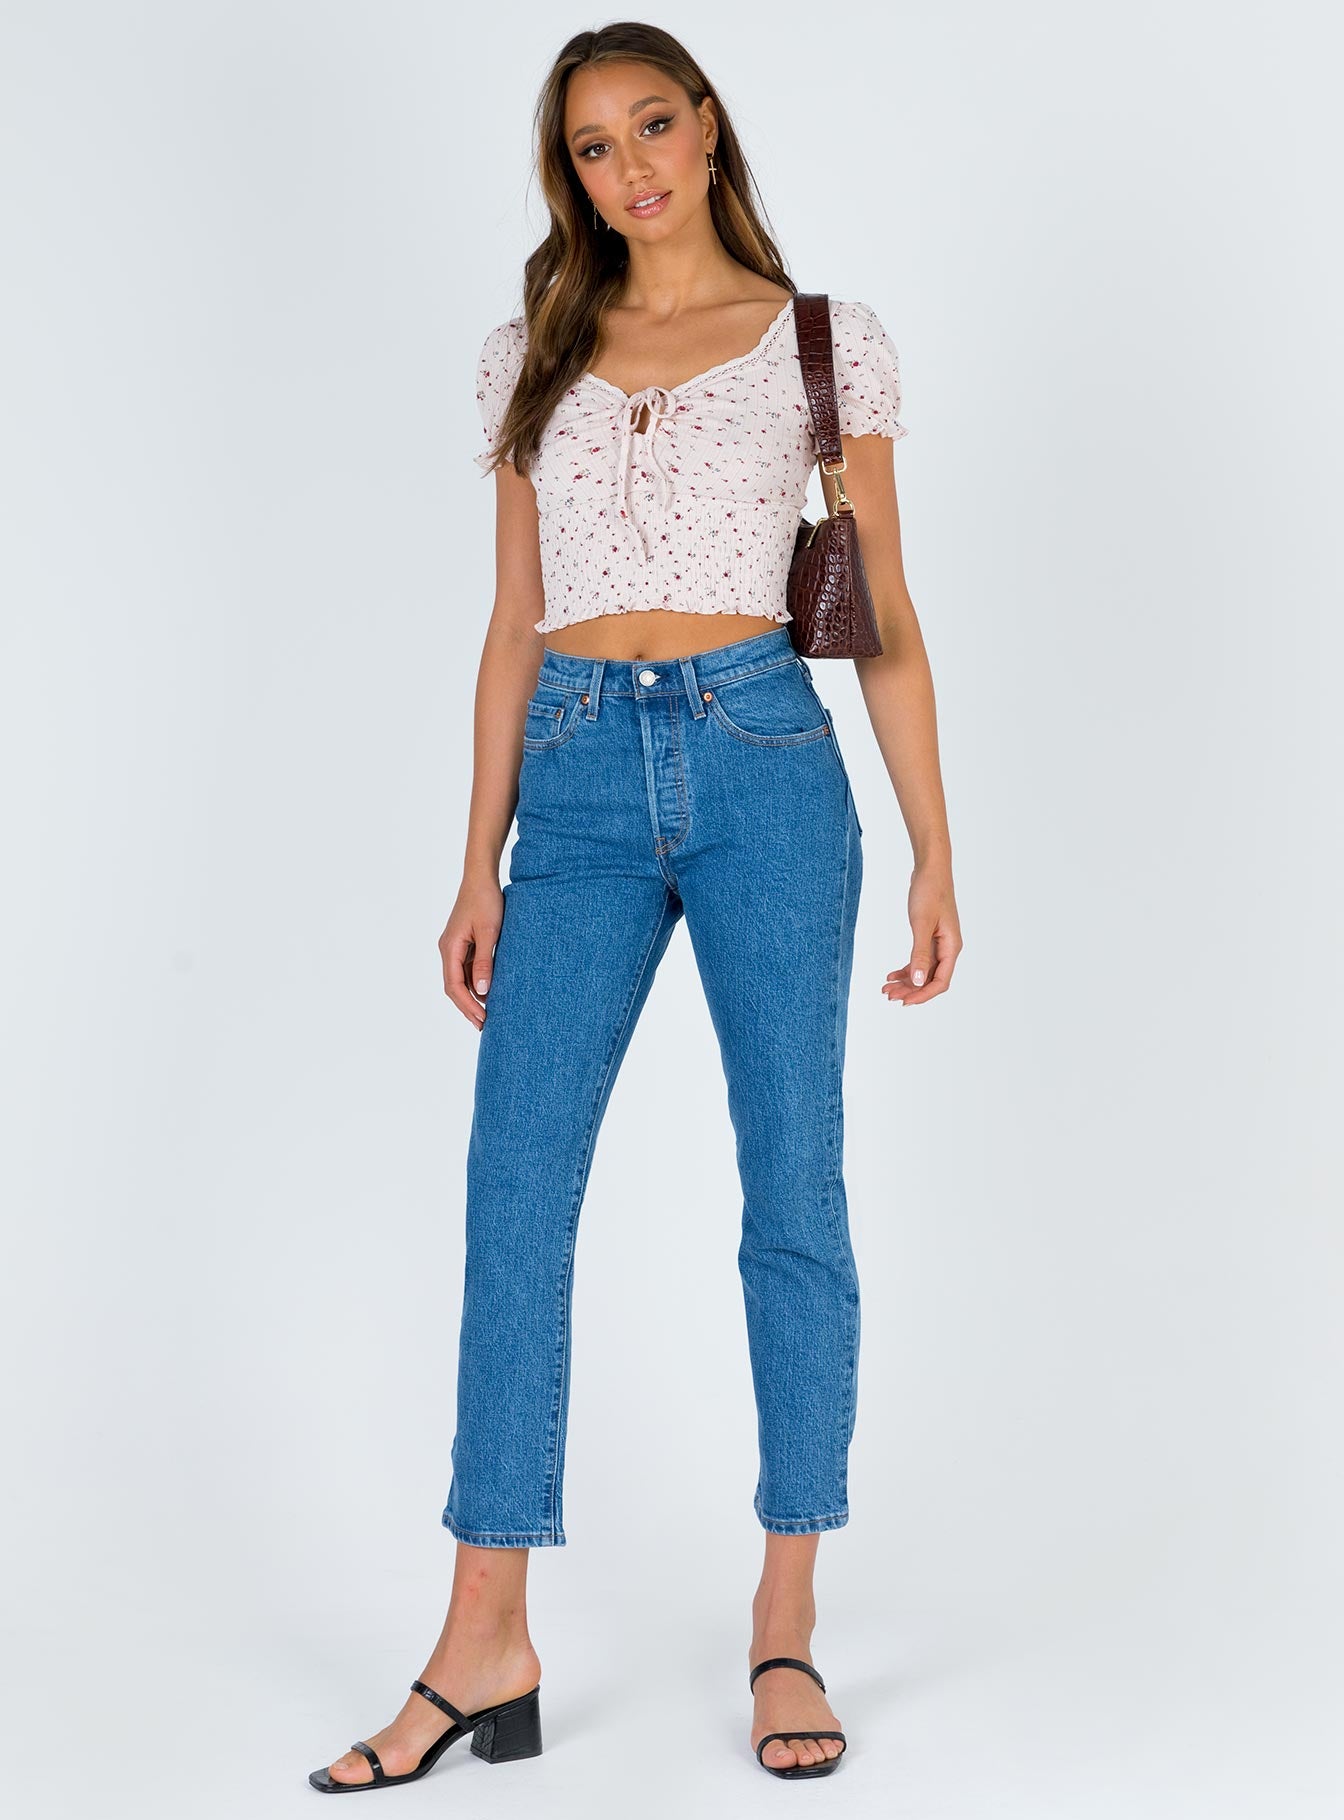 levis jeans cropped